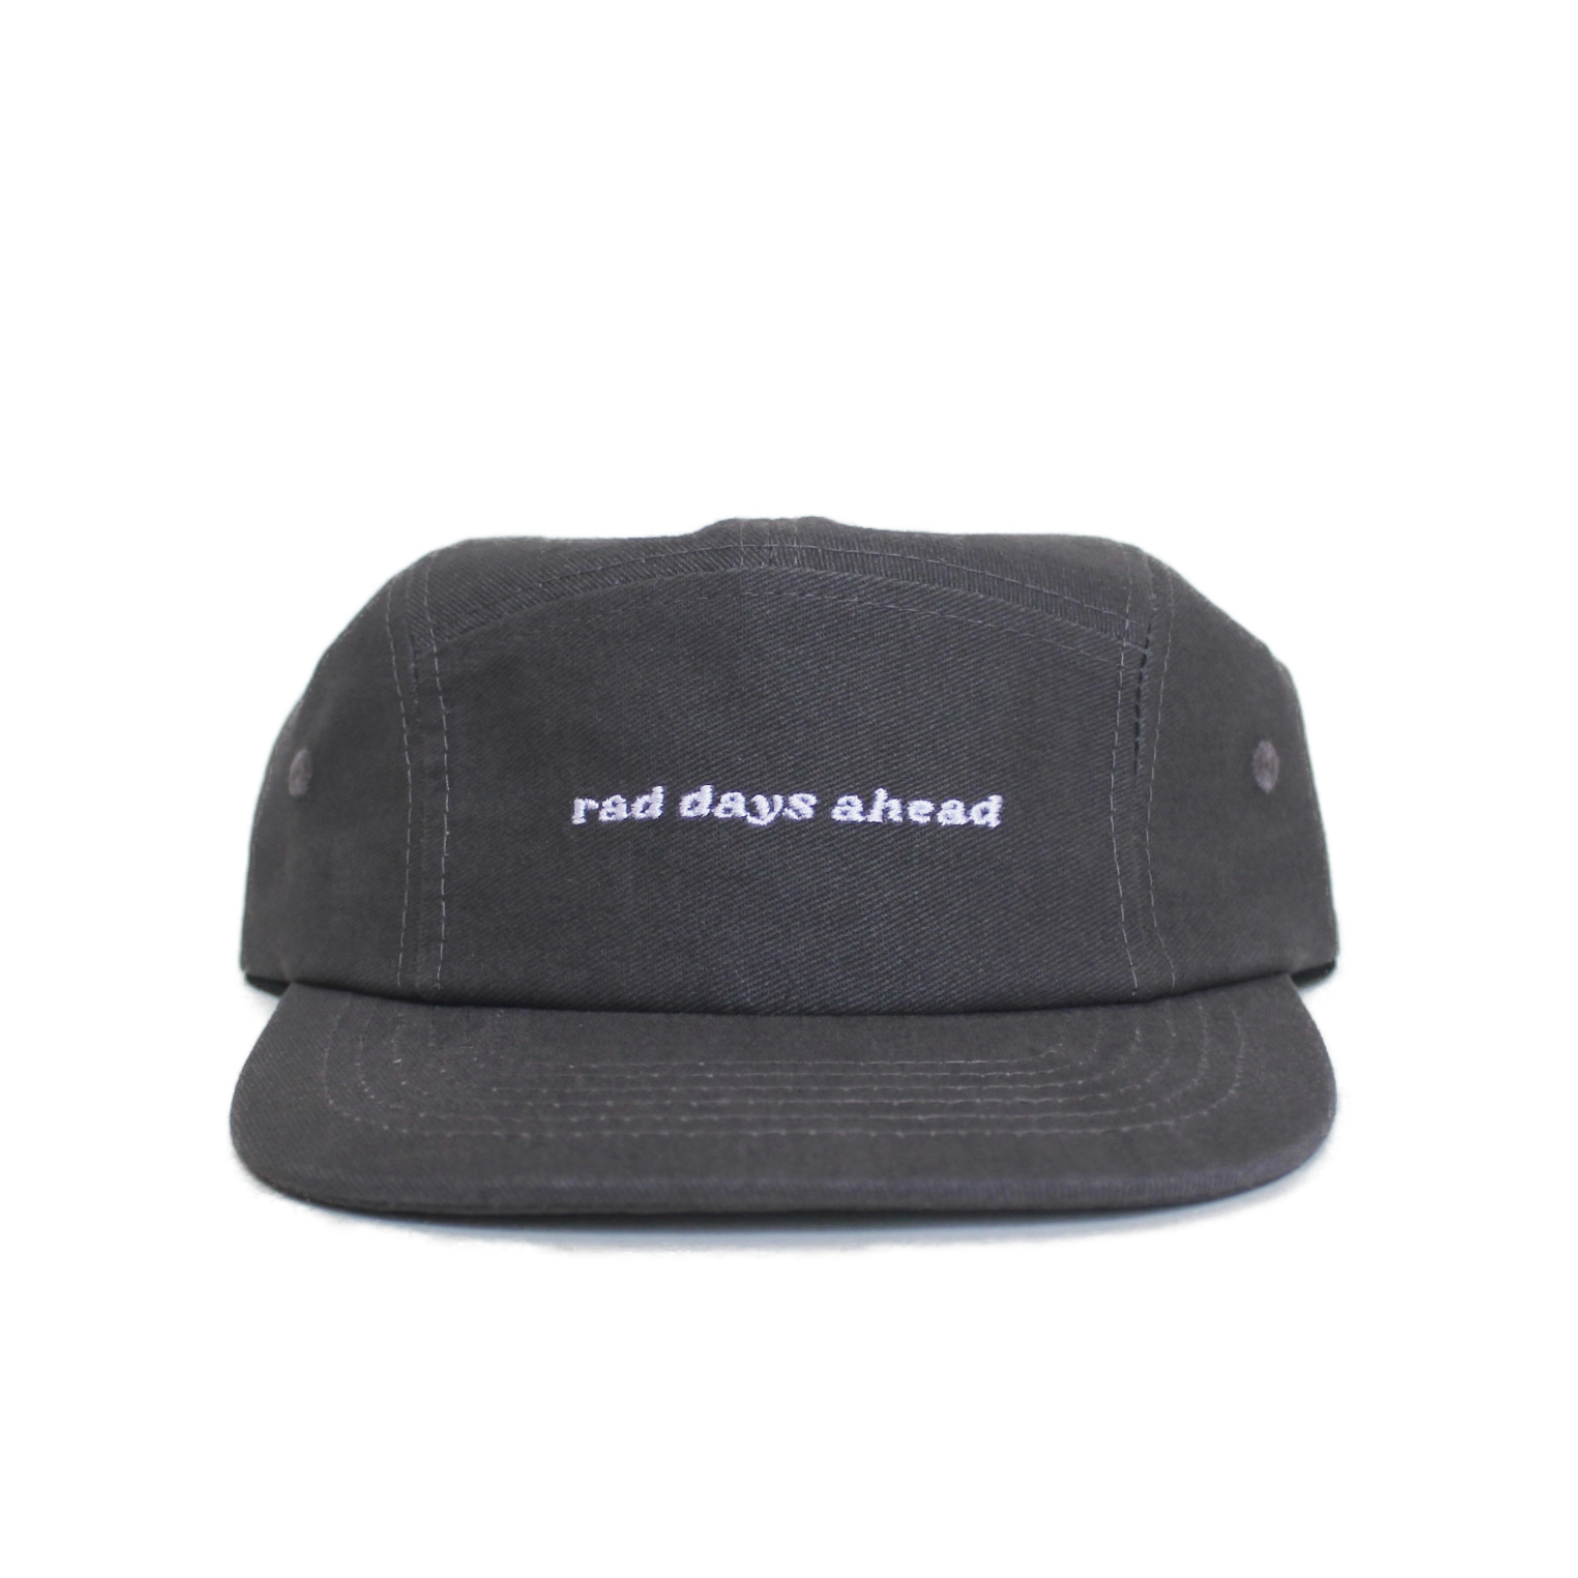 rad days ahead cotton five-panel hat in charcoal